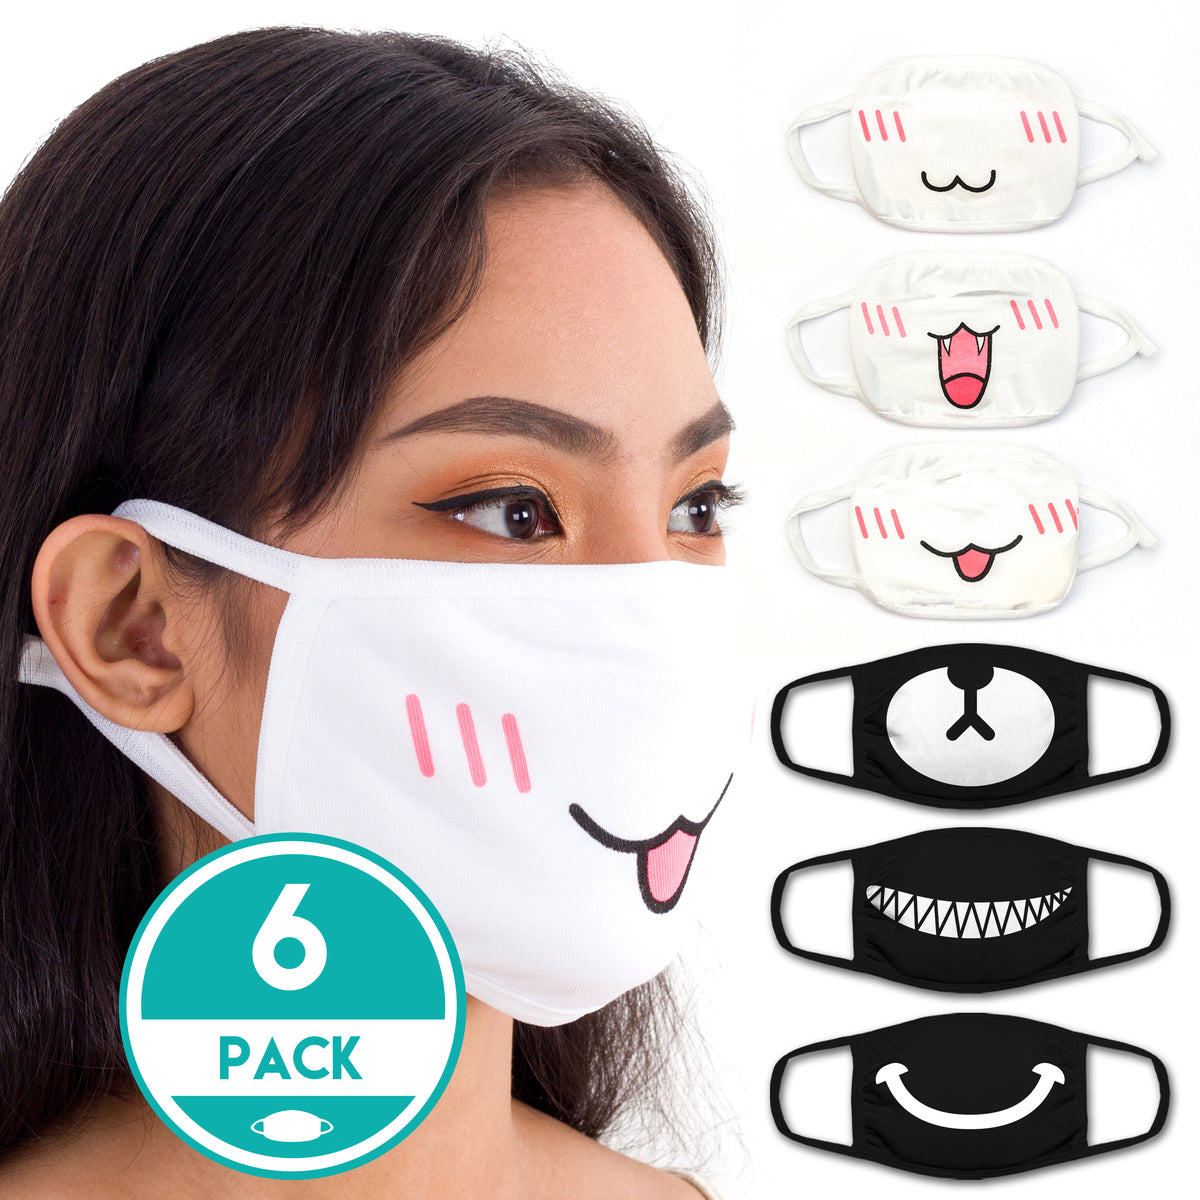 Face Mouth Mask - Cotton Face Covering Neck Mask for Men and Women - 6 Pack mixed Black & White Anime